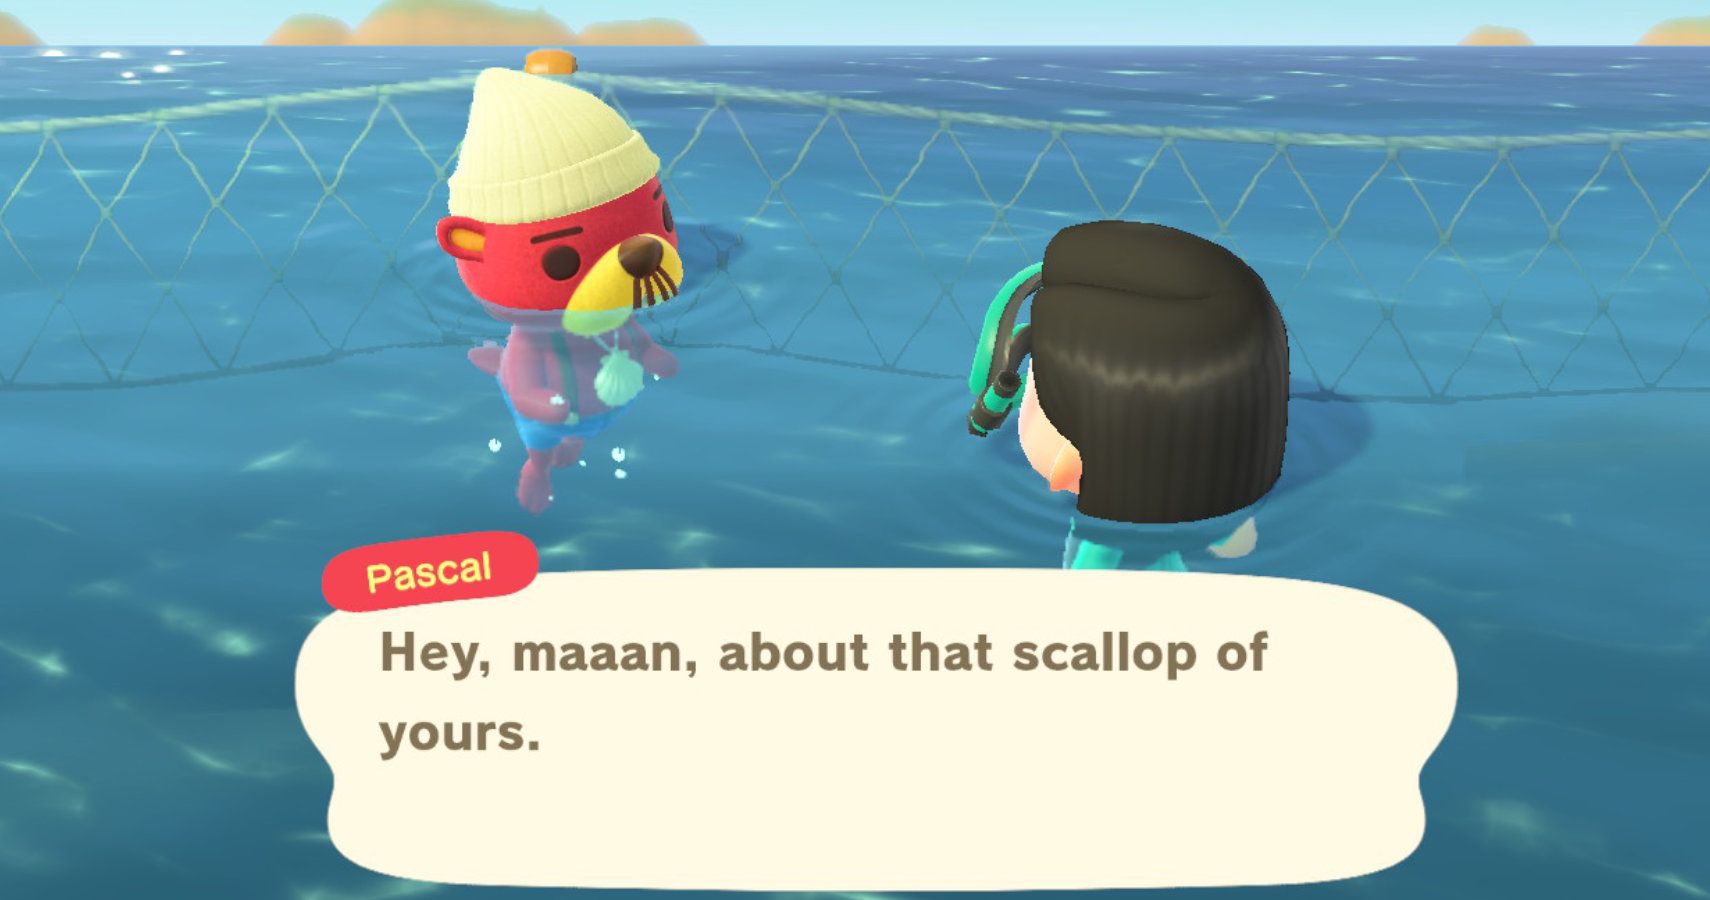 Pascal asking for a scallop.